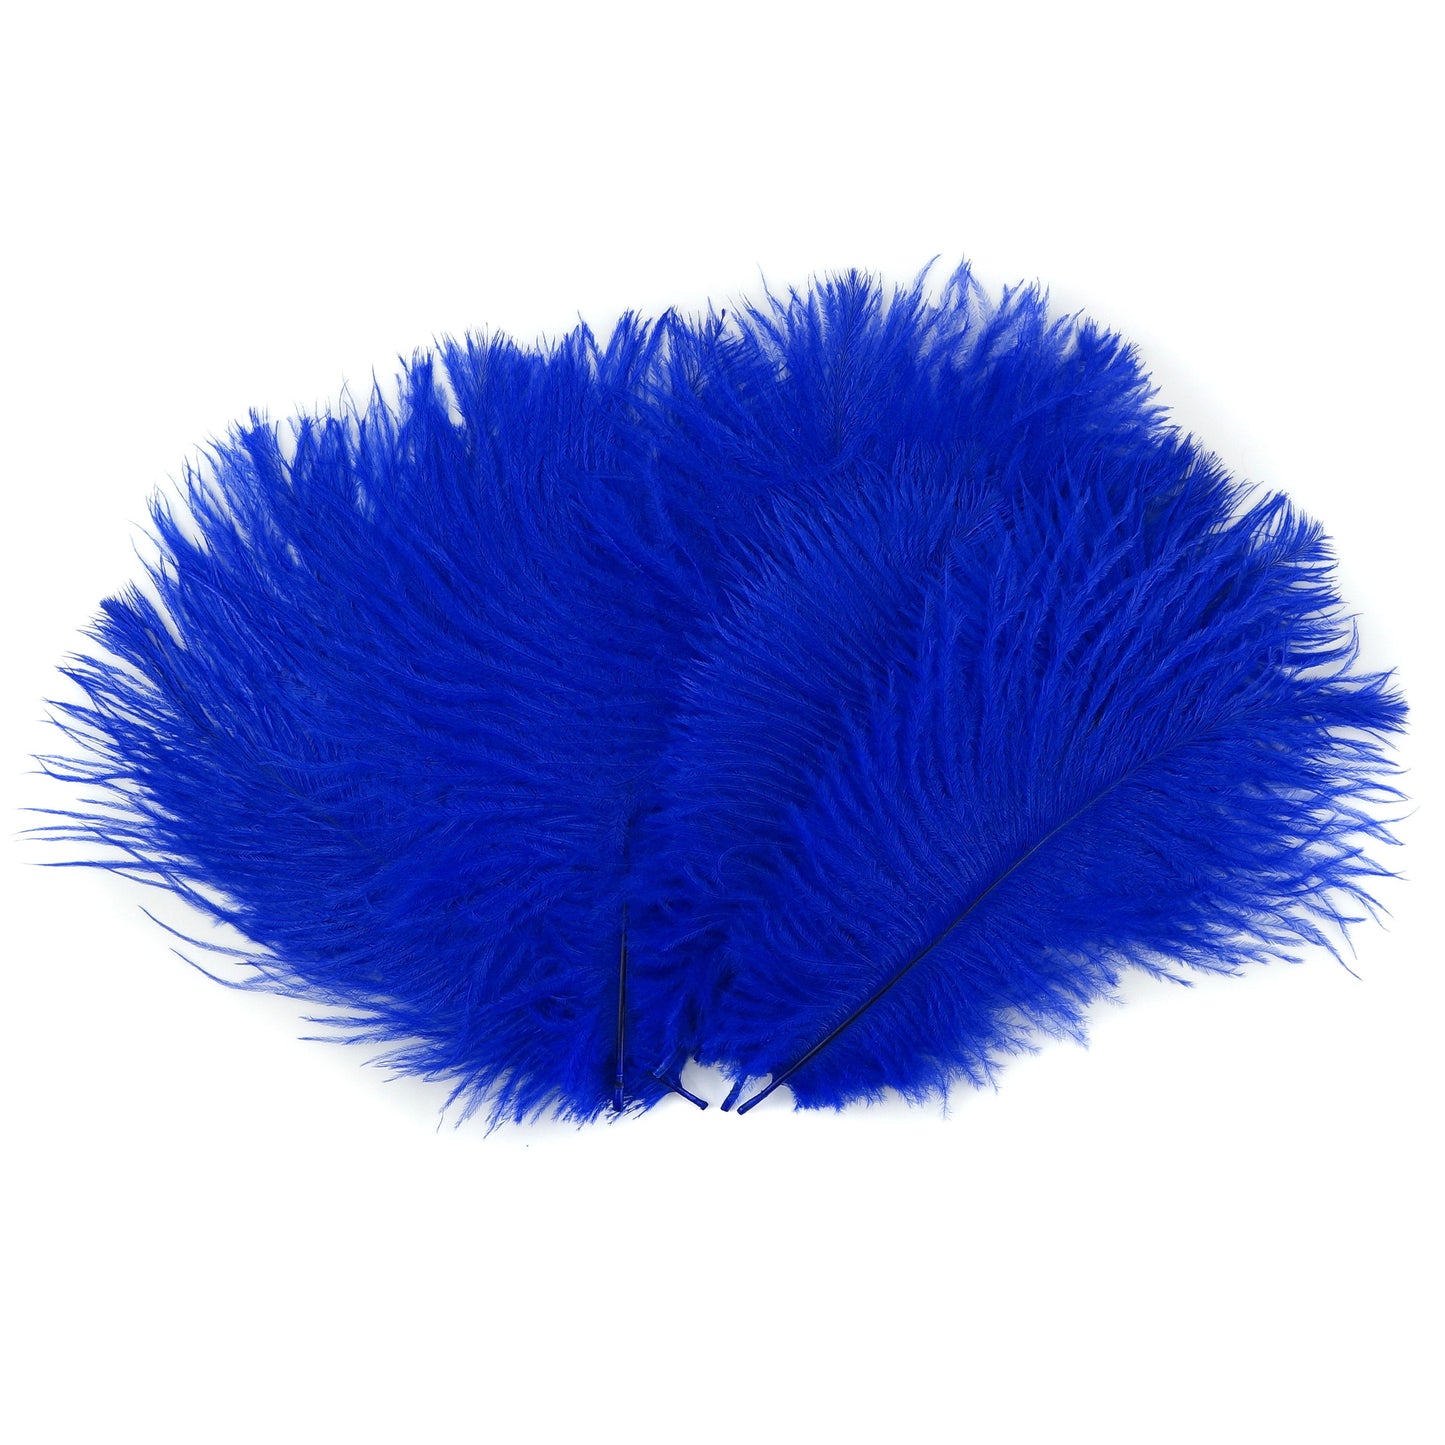 Ostrich Feathers 4-8" Drabs - Royal